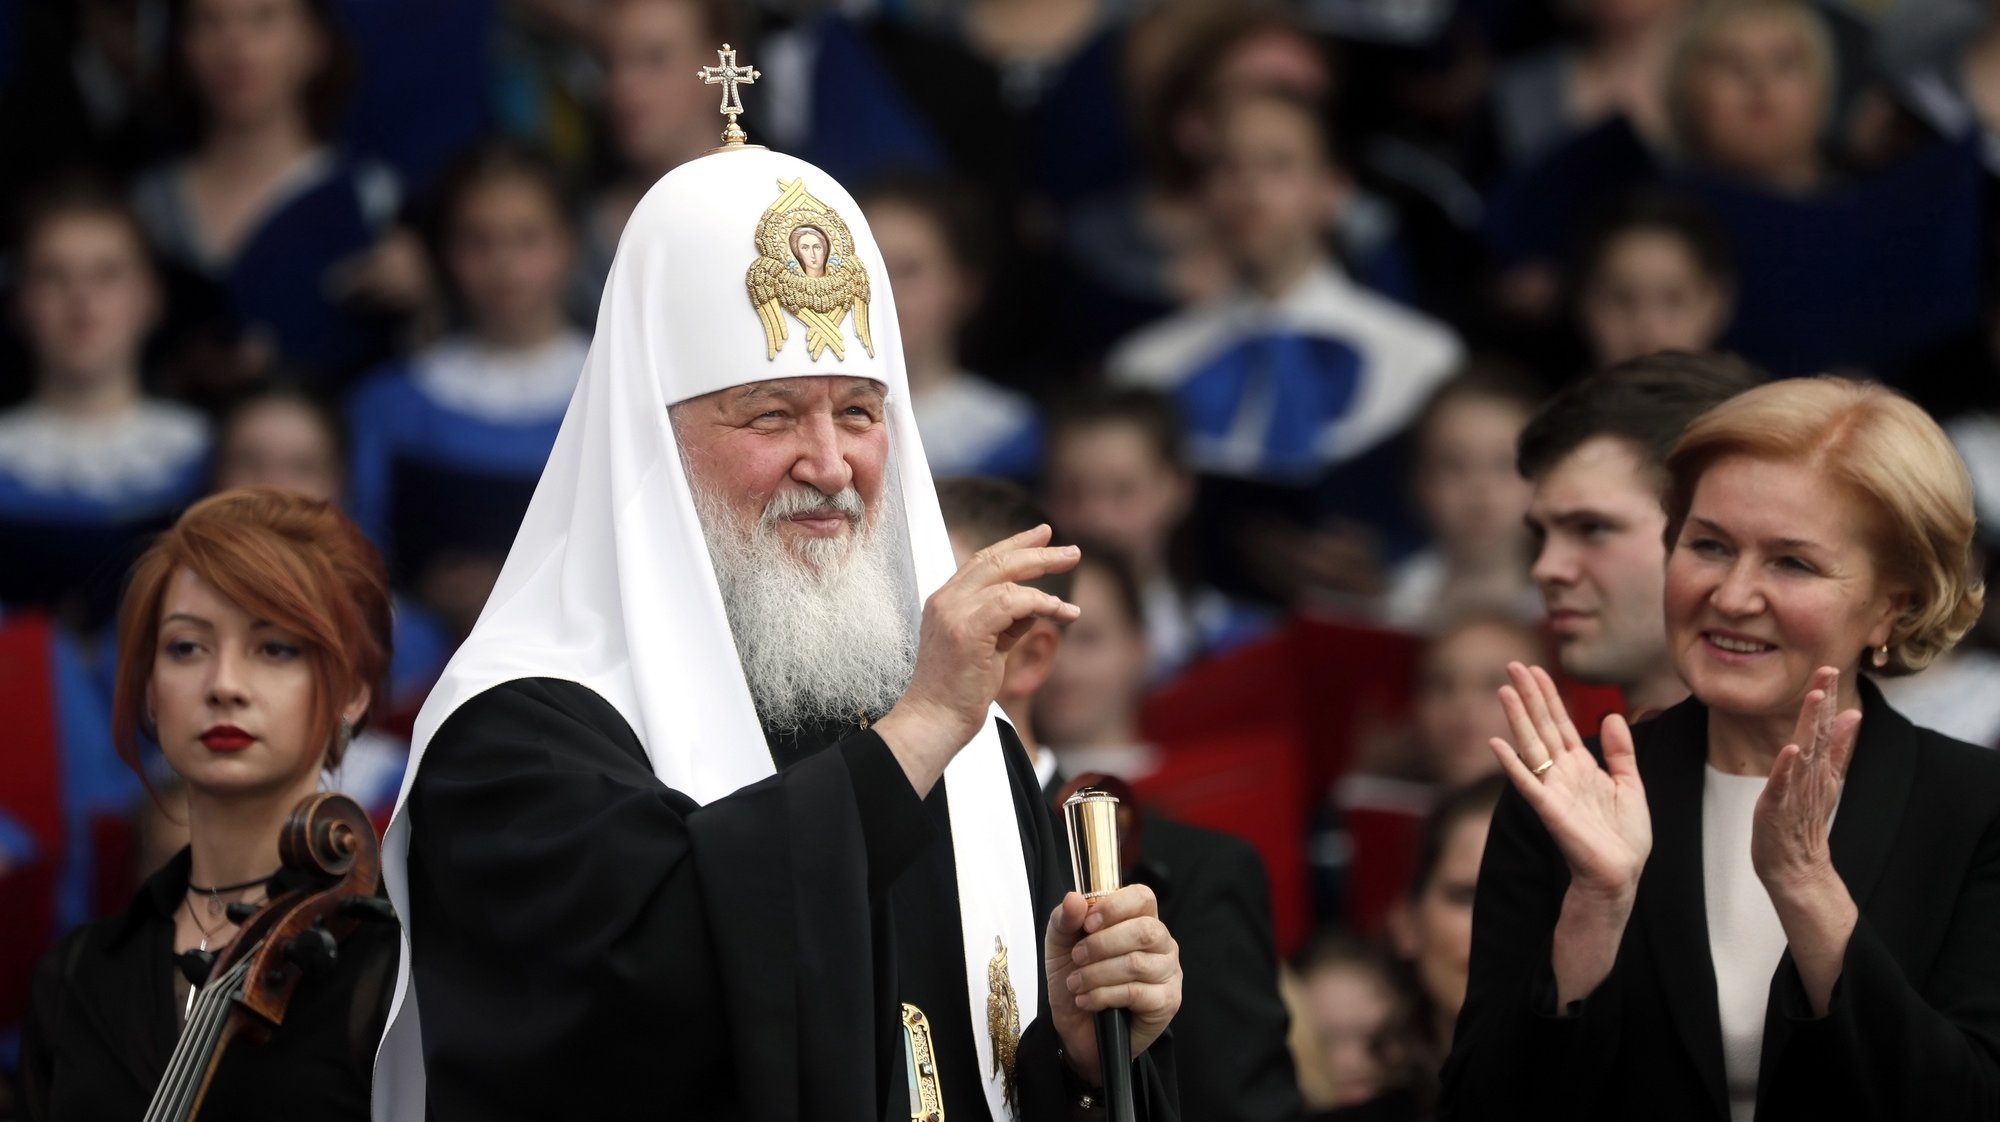 epa06759529 Patriarch of Moscow and All Russia Kirill speaks during the concert to mark the Day of Slavic Written Language at the Red Square in Moscow, Russia, 24 May 2018. The day commemorates the Saints Cyril and Methodius, creators of the Slavic Cyrilic alphabet.  EPA/MAXIM SHIPENKOV